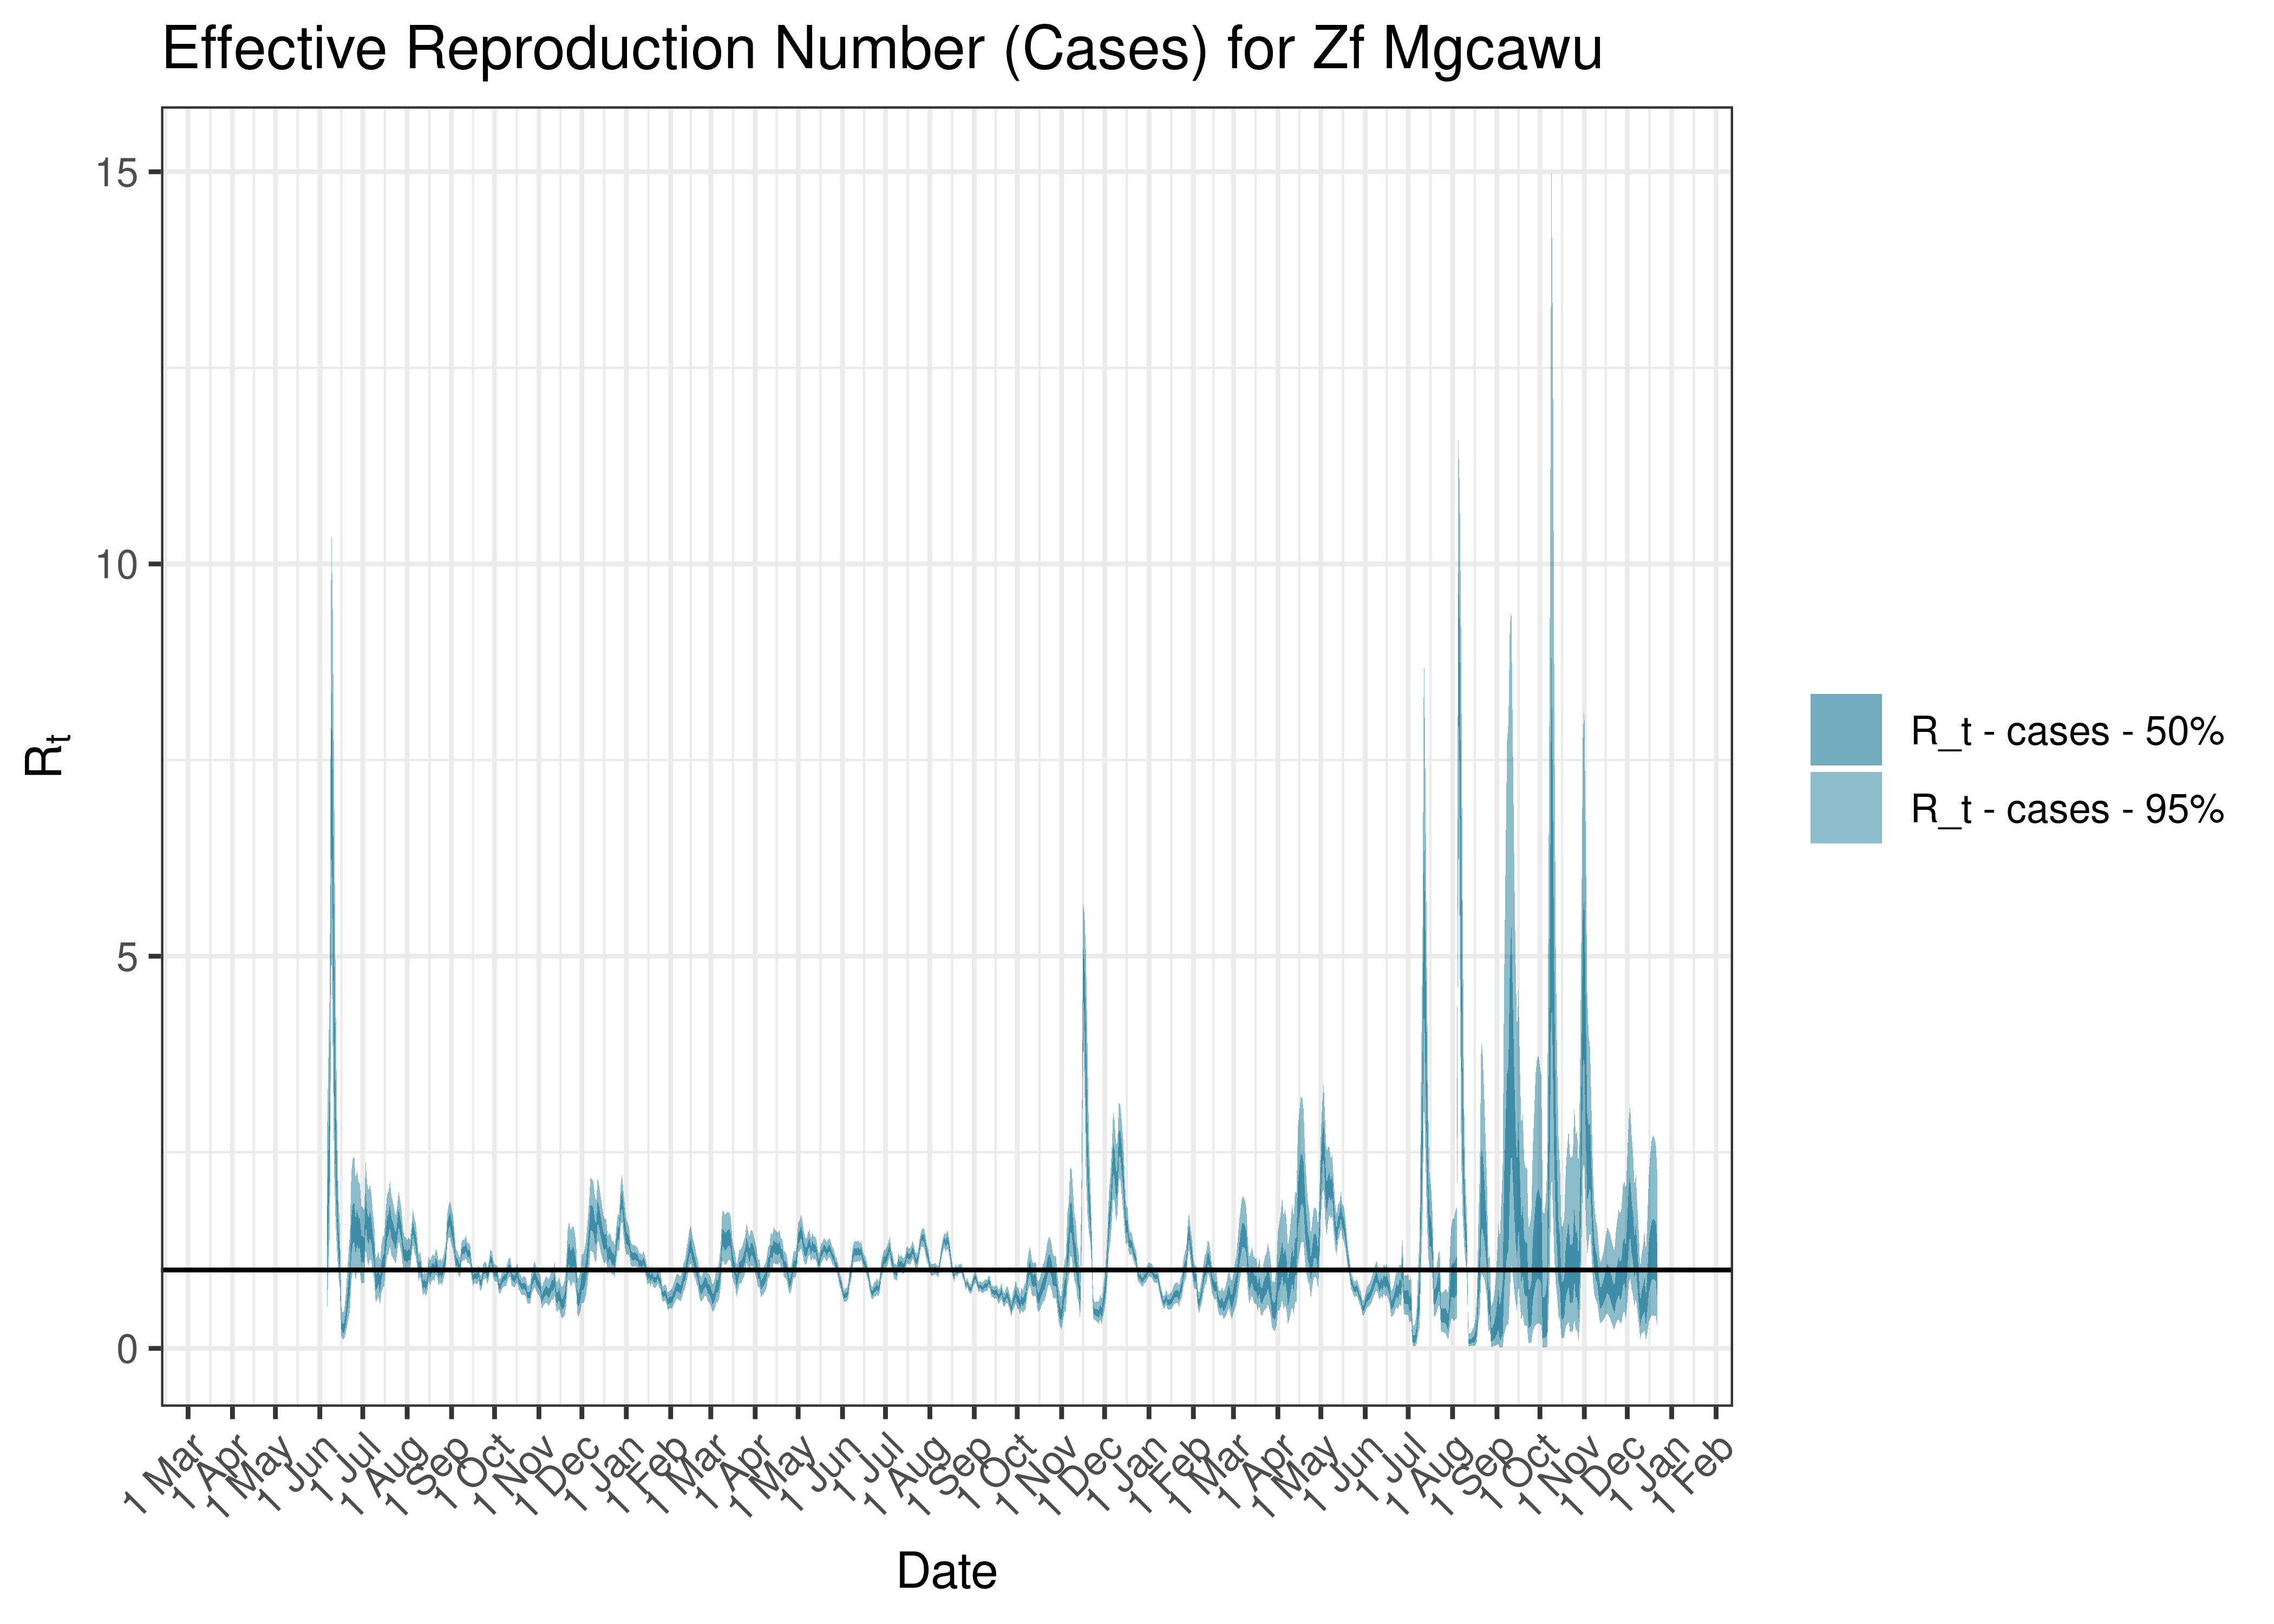 Estimated Effective Reproduction Number Based on Cases for Zf Mgcawu since 1 April 2020